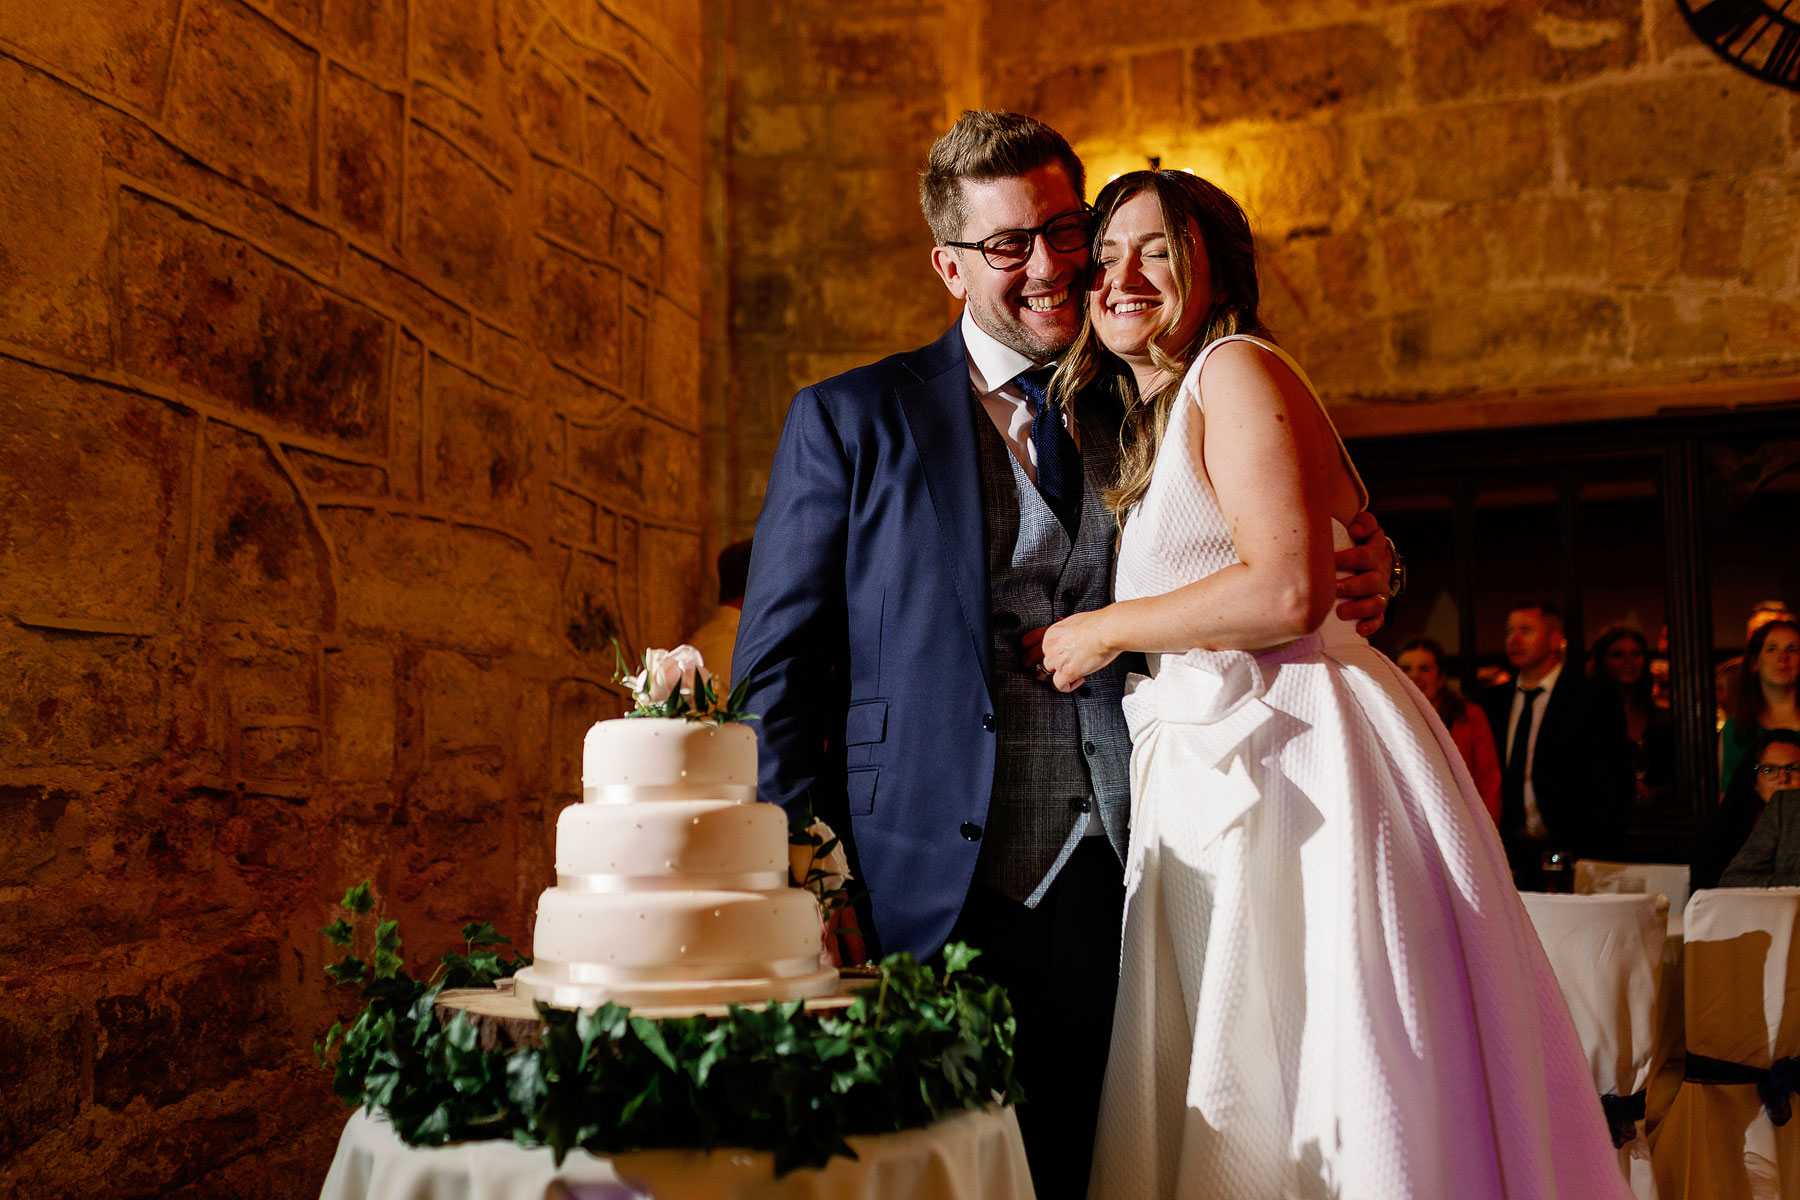 fun wedding photos of a bride and groom in yorkshire